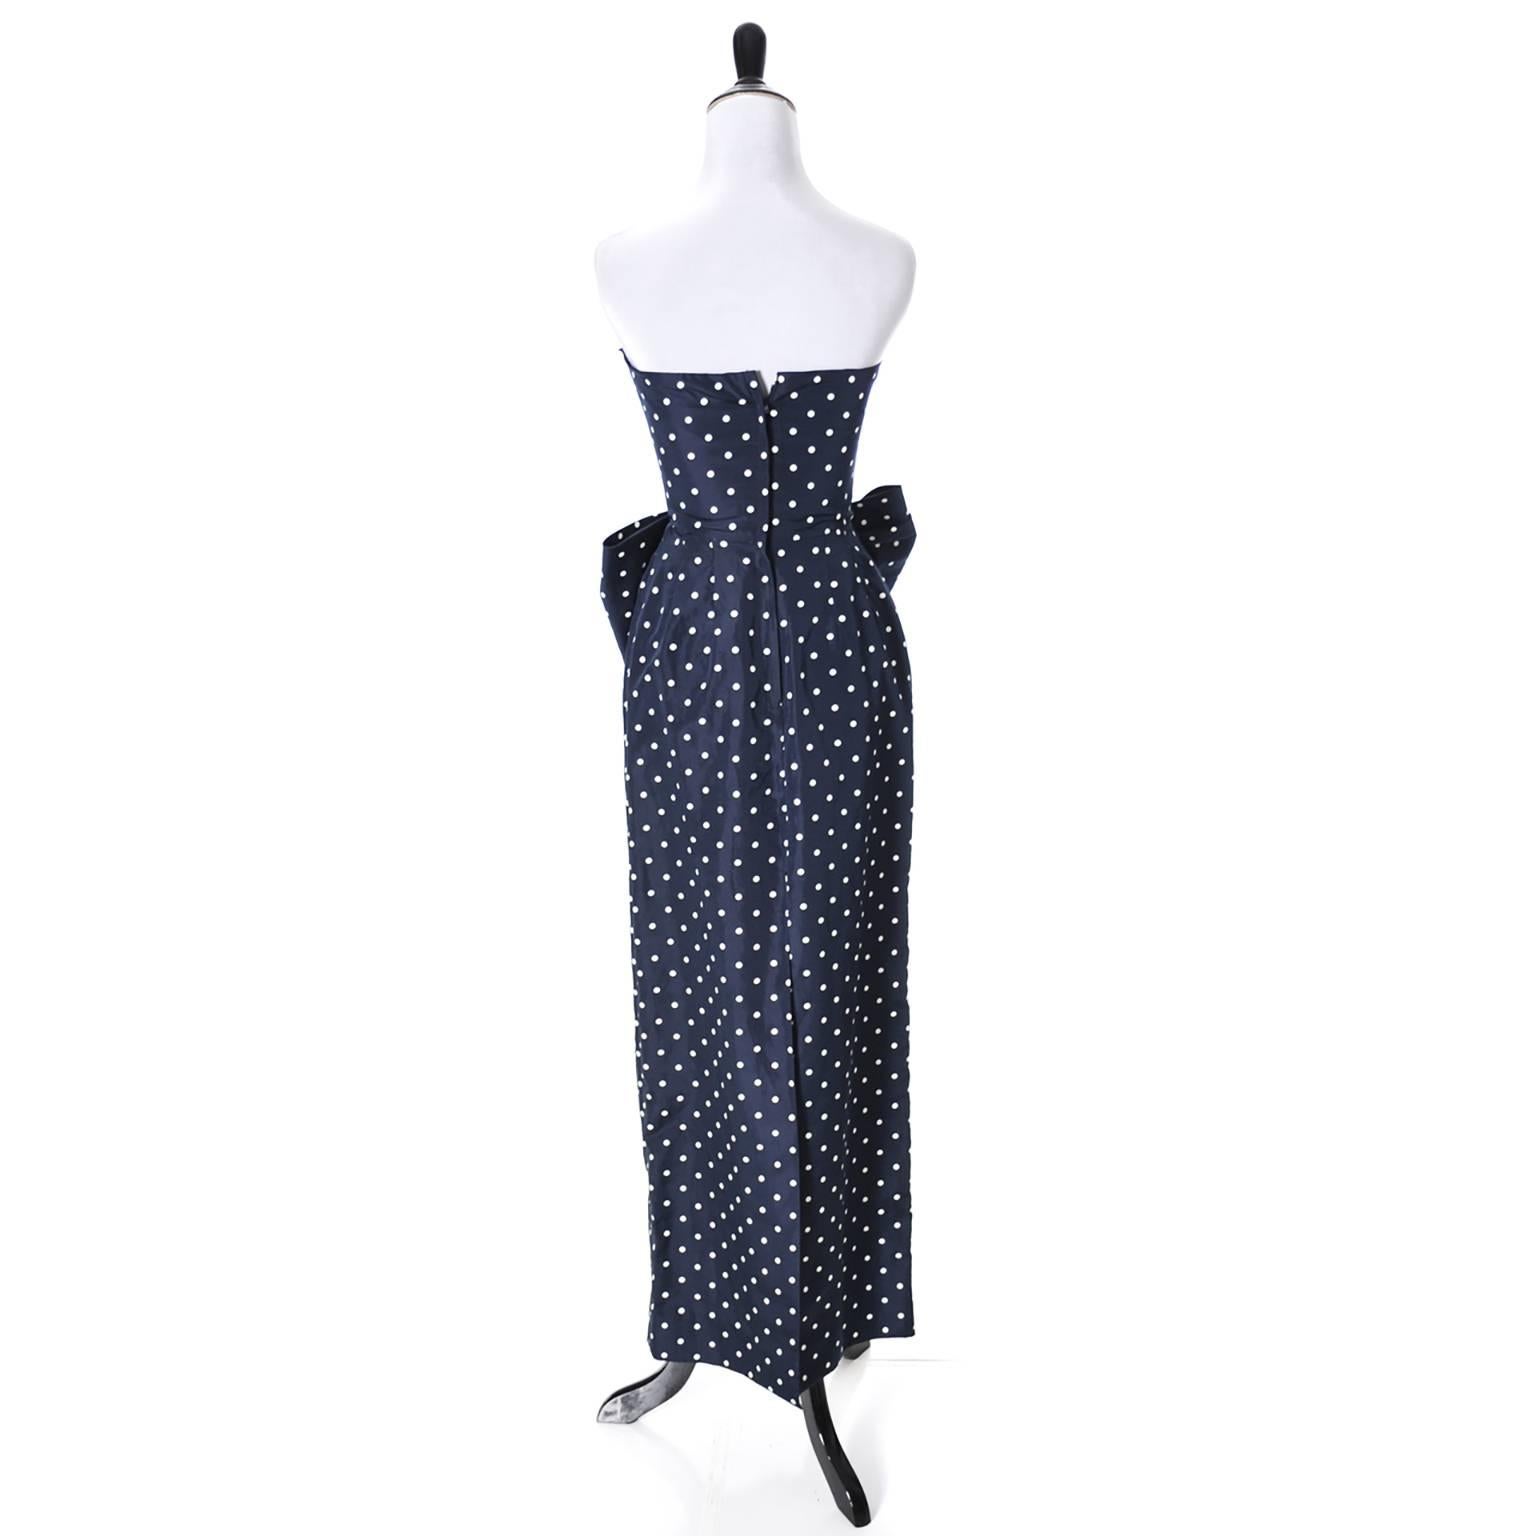 1980s Strapless Victor Costa Vintage Dress Navy White Polka Dots 2/4 at ...